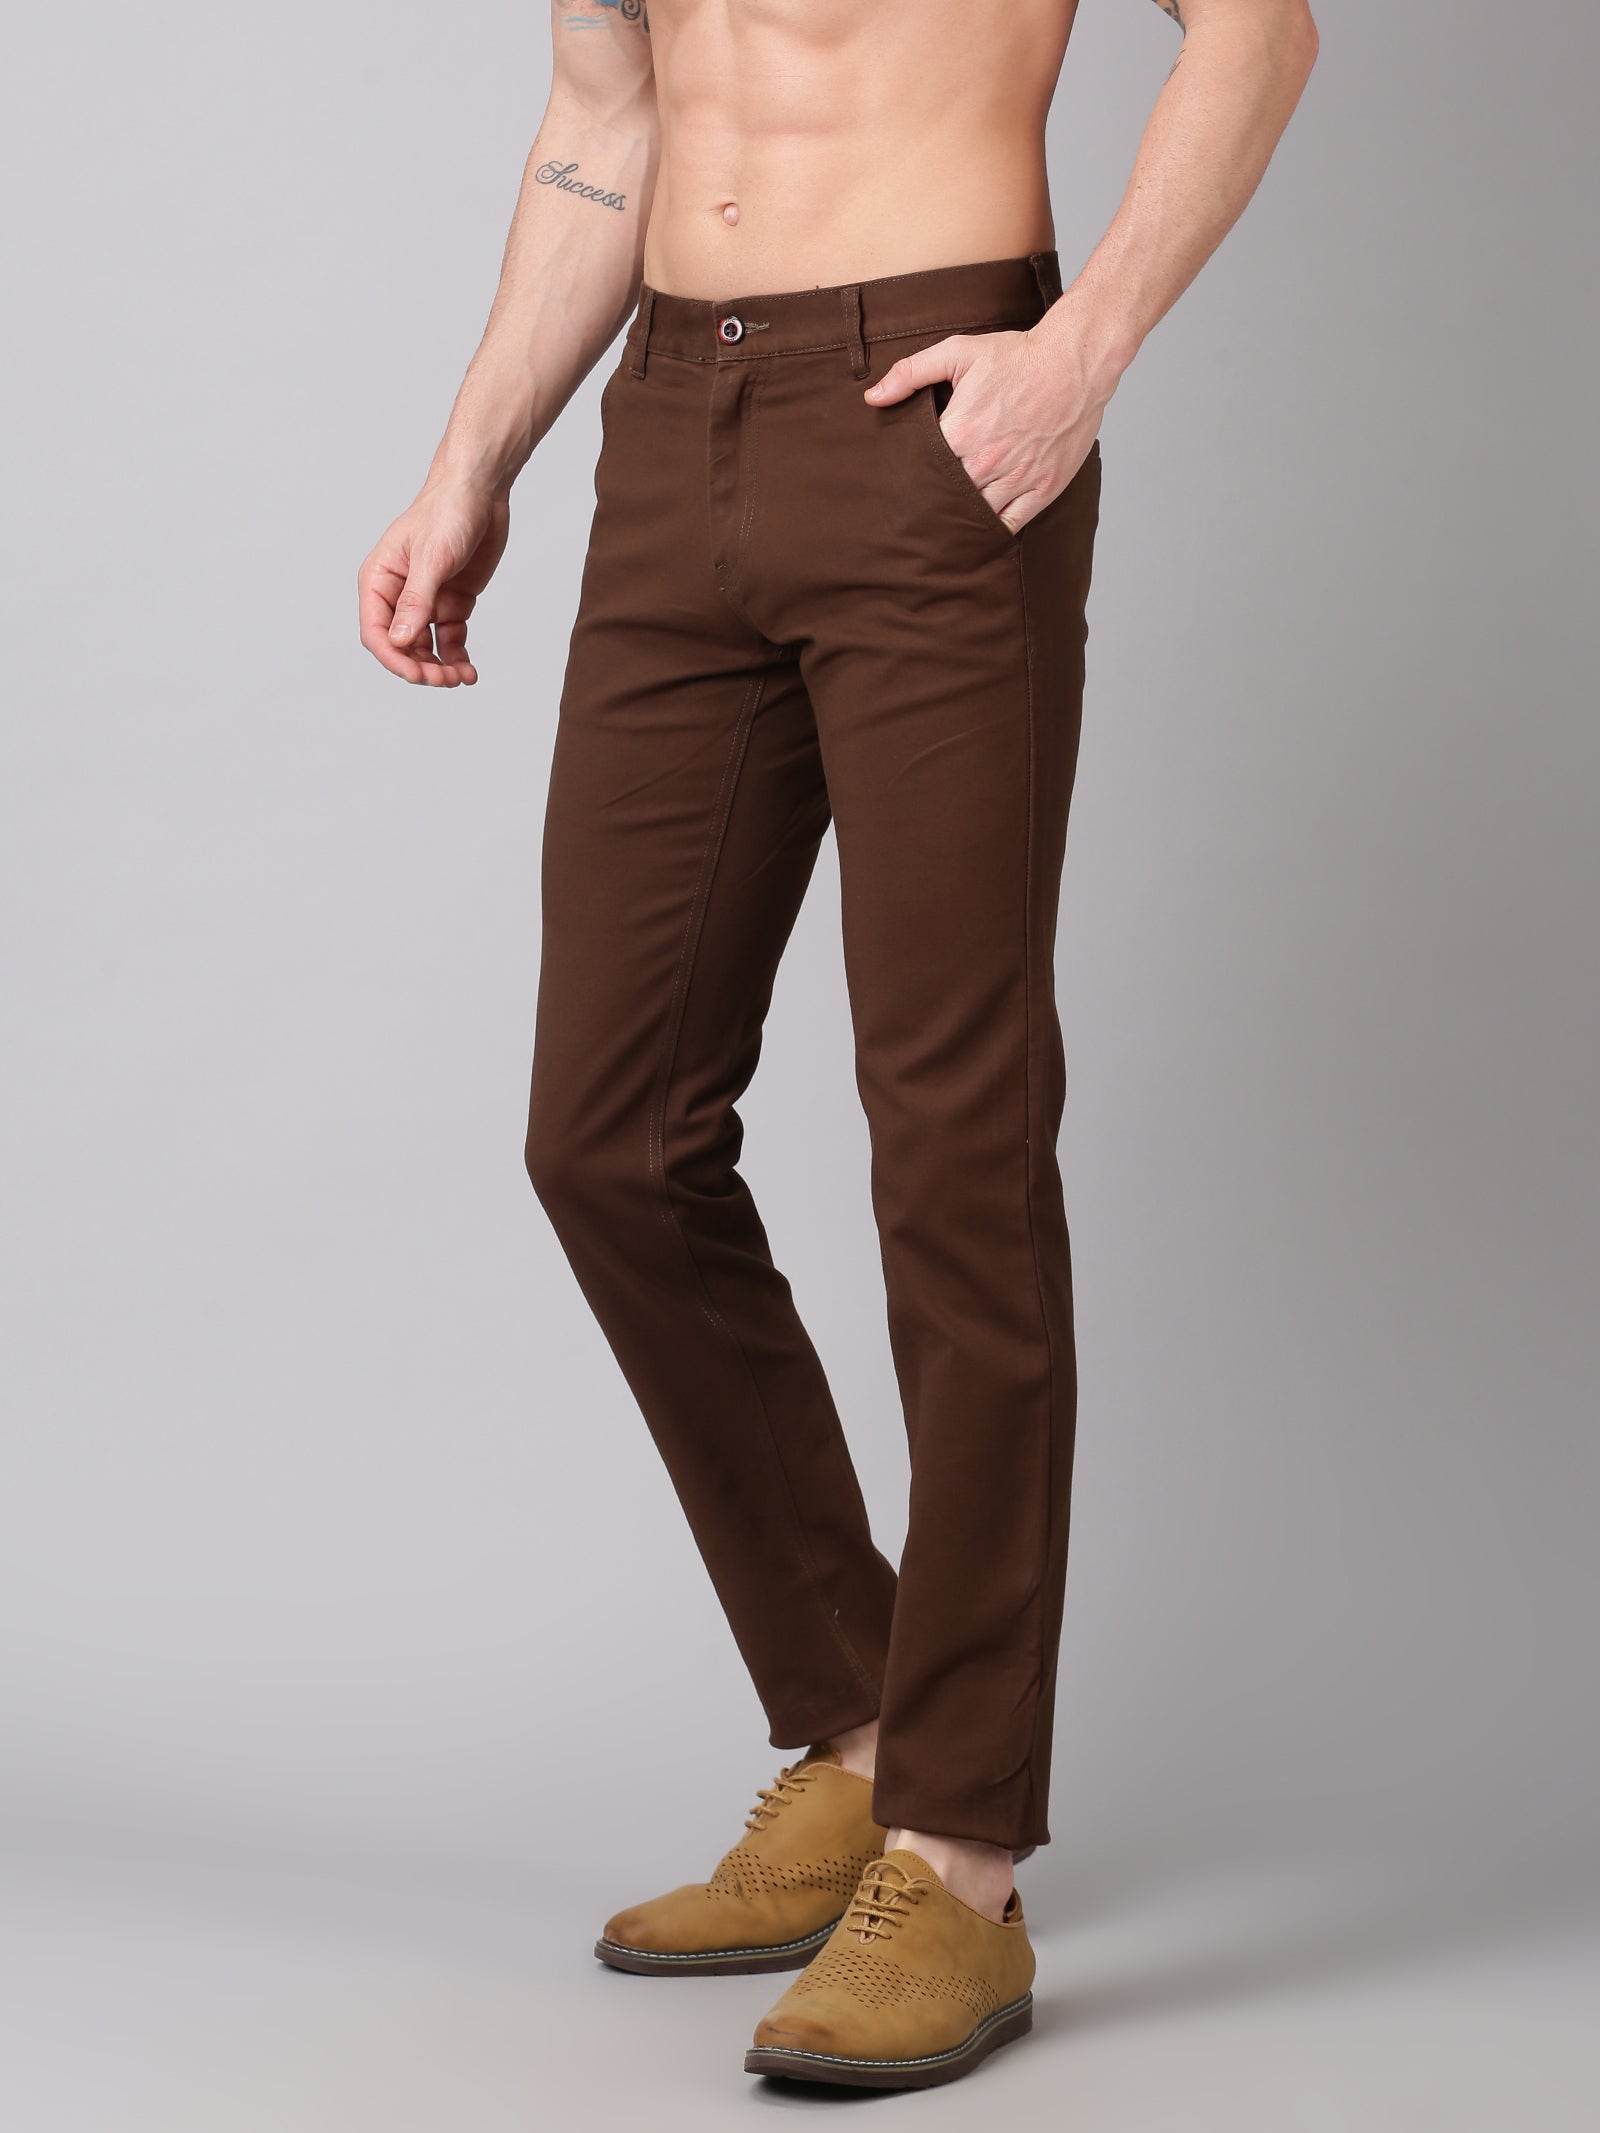 Buy Regular Trouser Pants Brown Sky Blue and Denim Combo of 3 Cotton for  Best Price Reviews Free Shipping